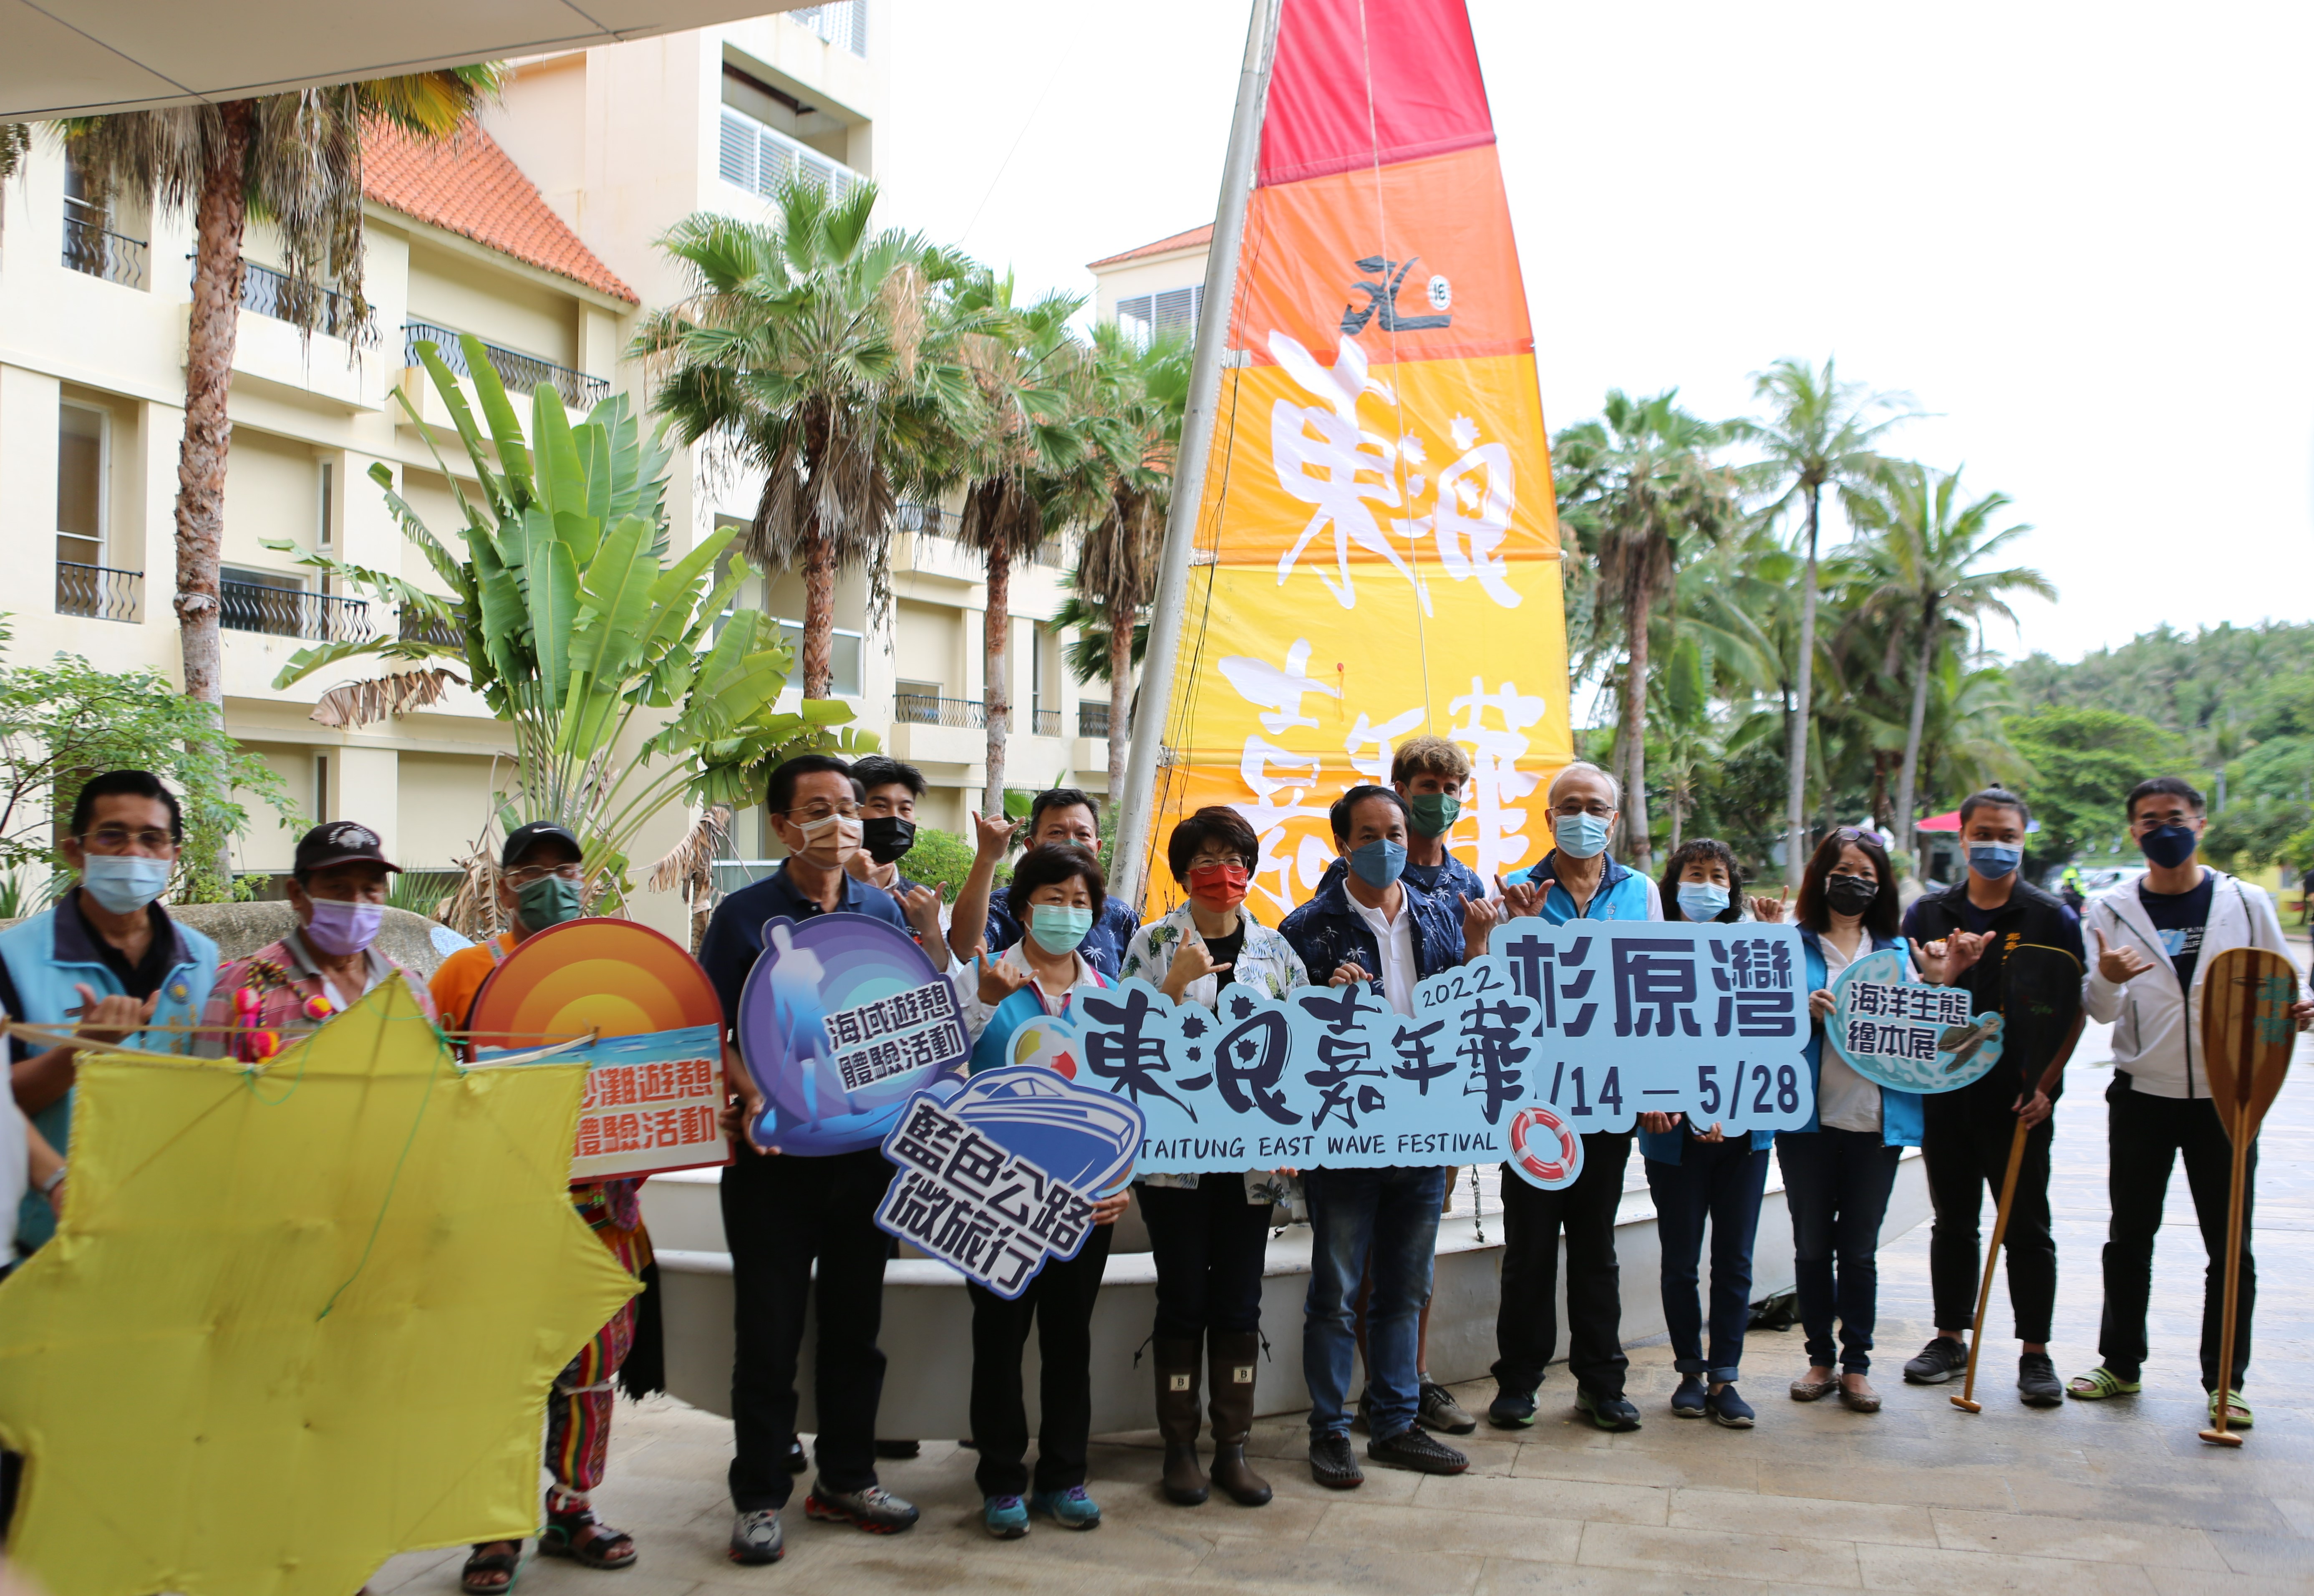 2022 TAITUNG EAST WAVE FESTIVAL’s Grand OpeningMagistrate April Yao and her honorary guests were all present to kick-off the event together.